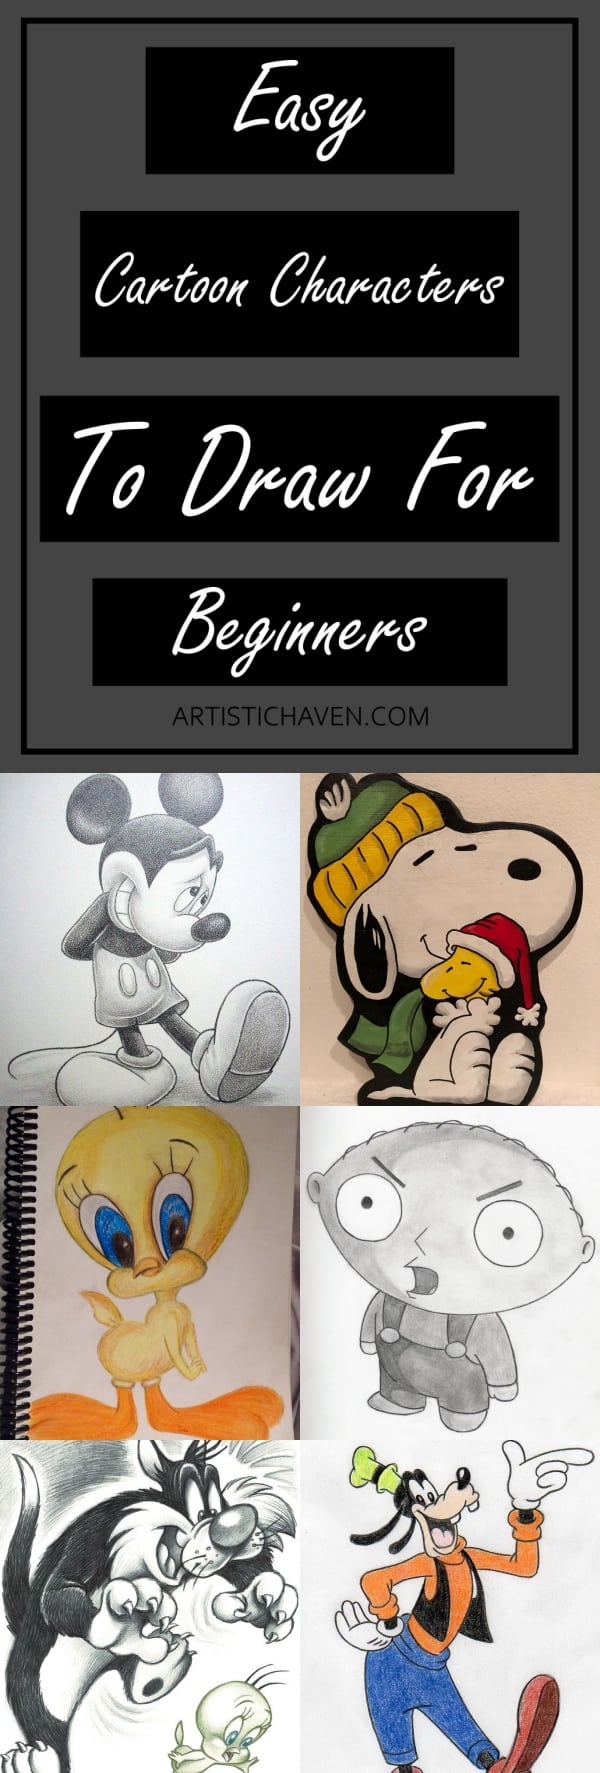 Easy Cartoon Characters To Draw For Beginners